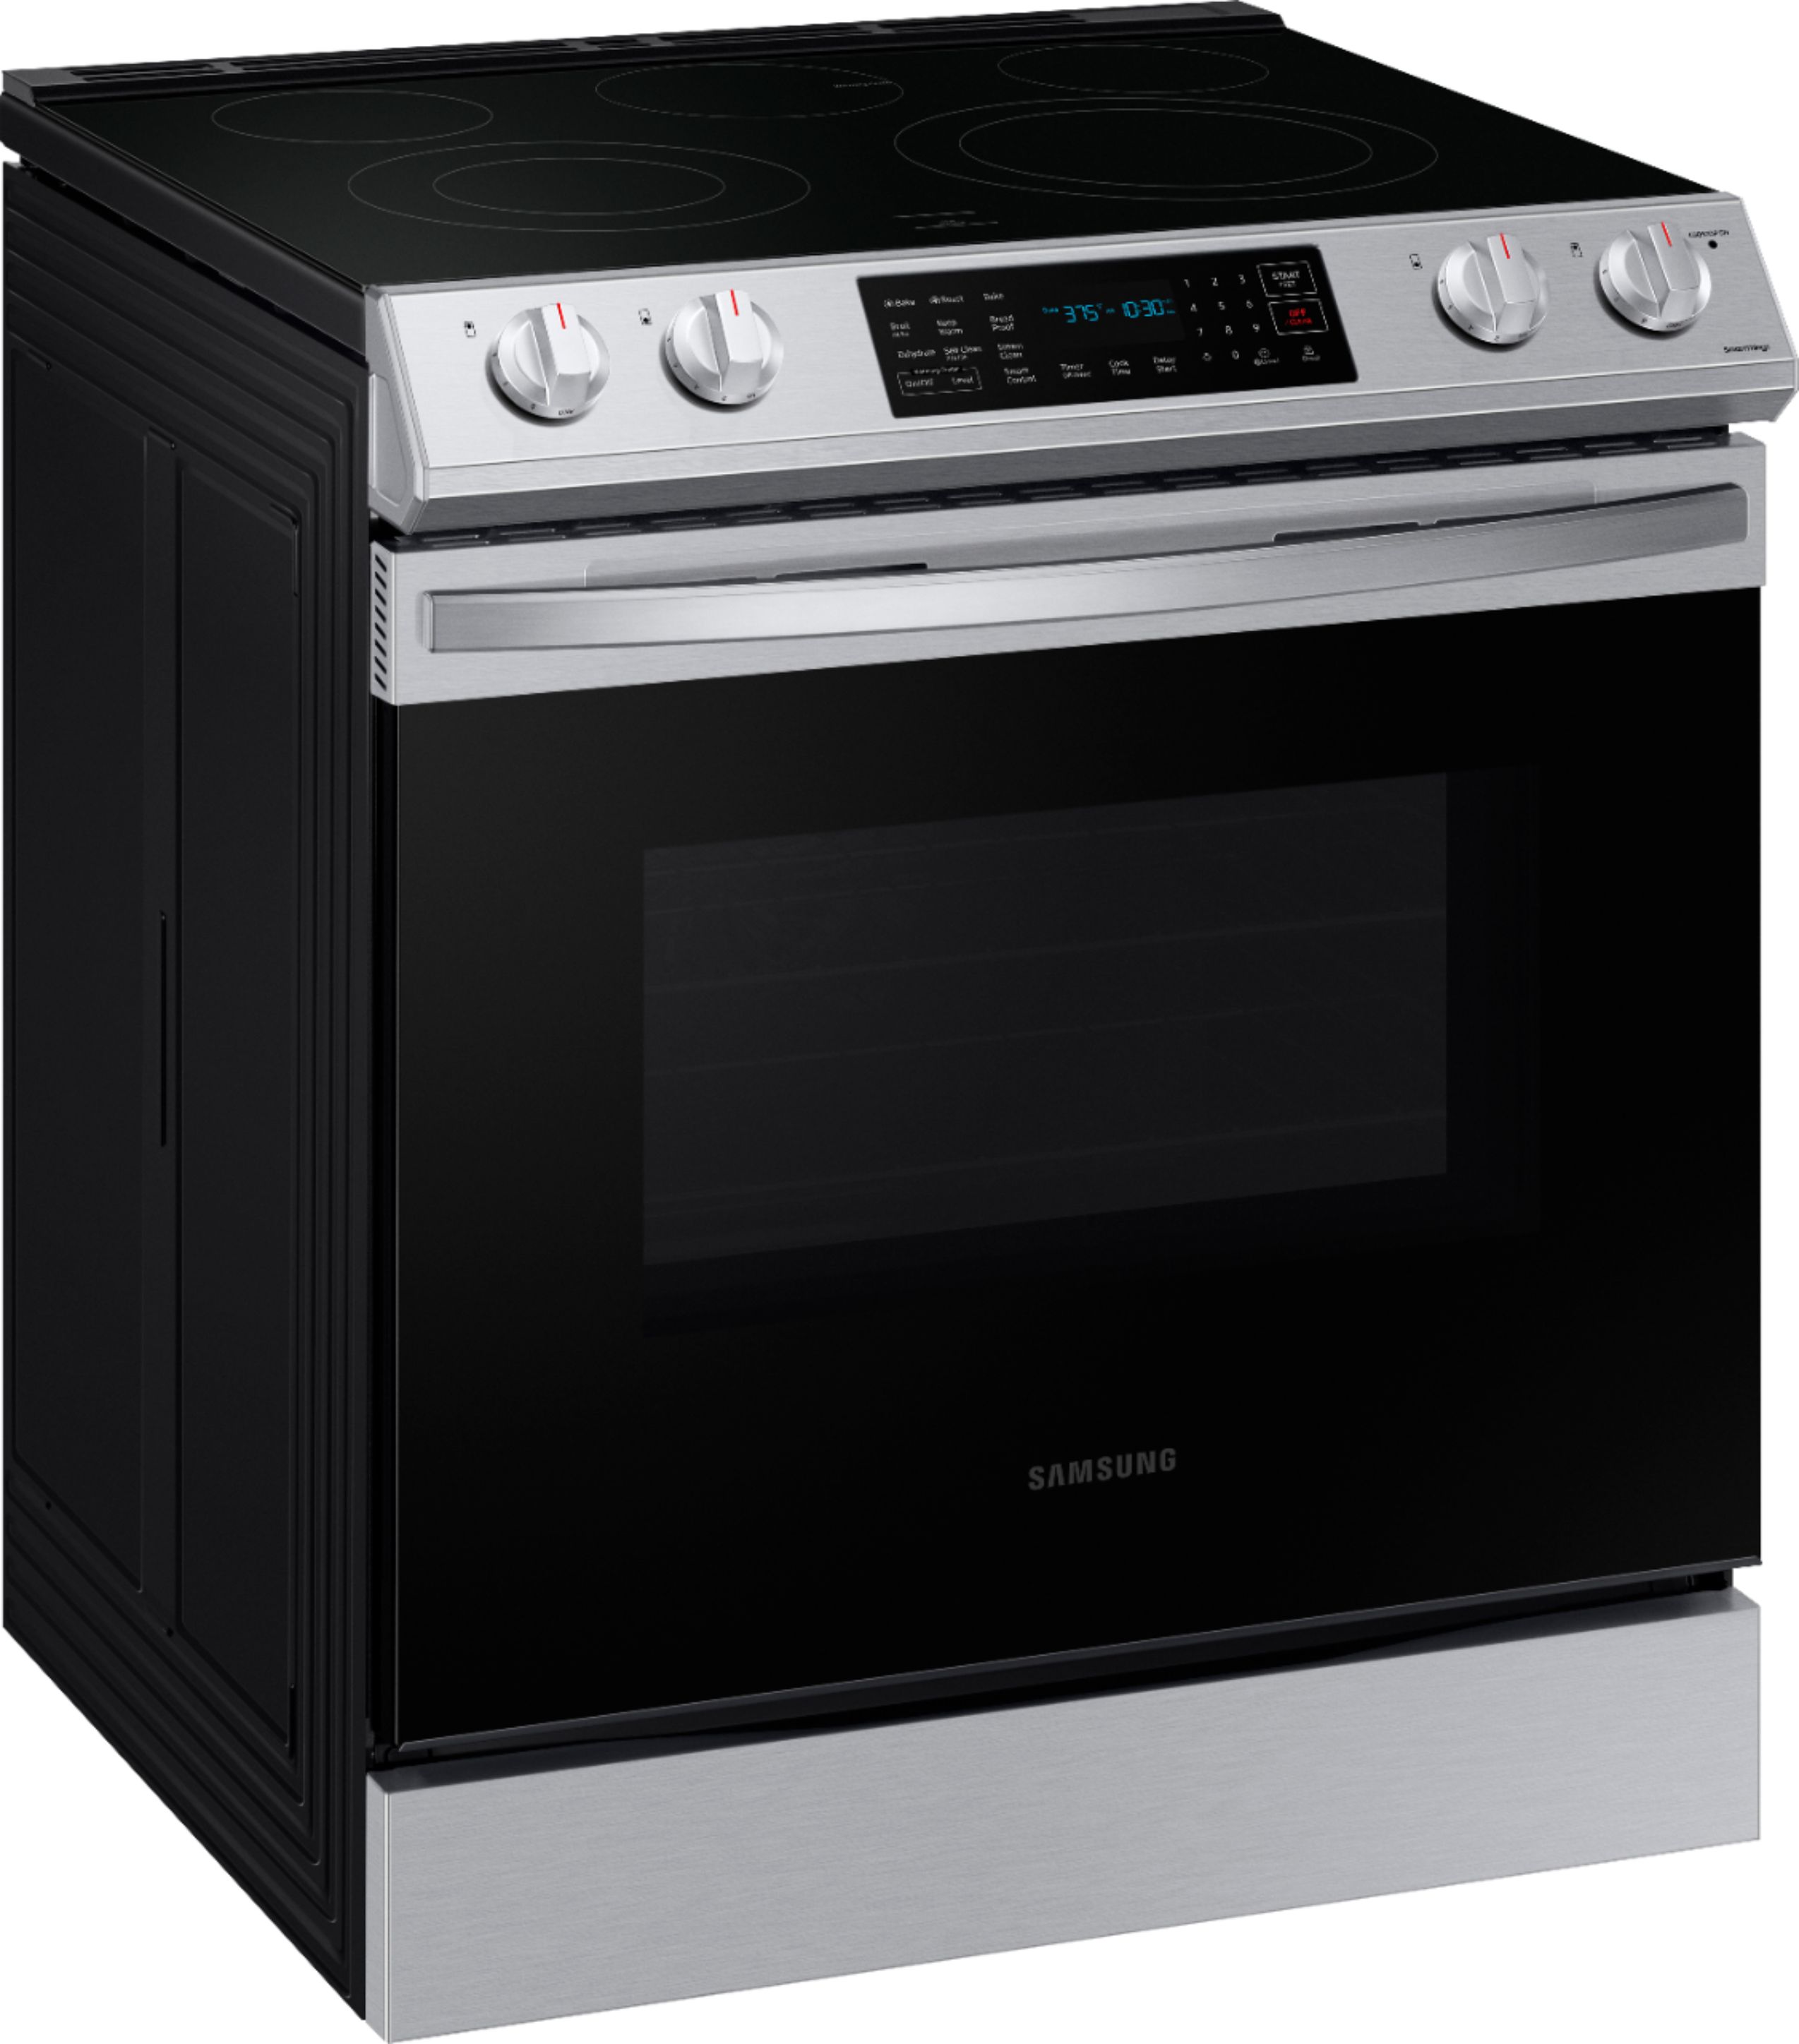 Angle View: Samsung - 6.3 cu. ft. Front Control Slide-in Electric Range with Convection & Wi-Fi, Fingerprint Resistant - Stainless steel